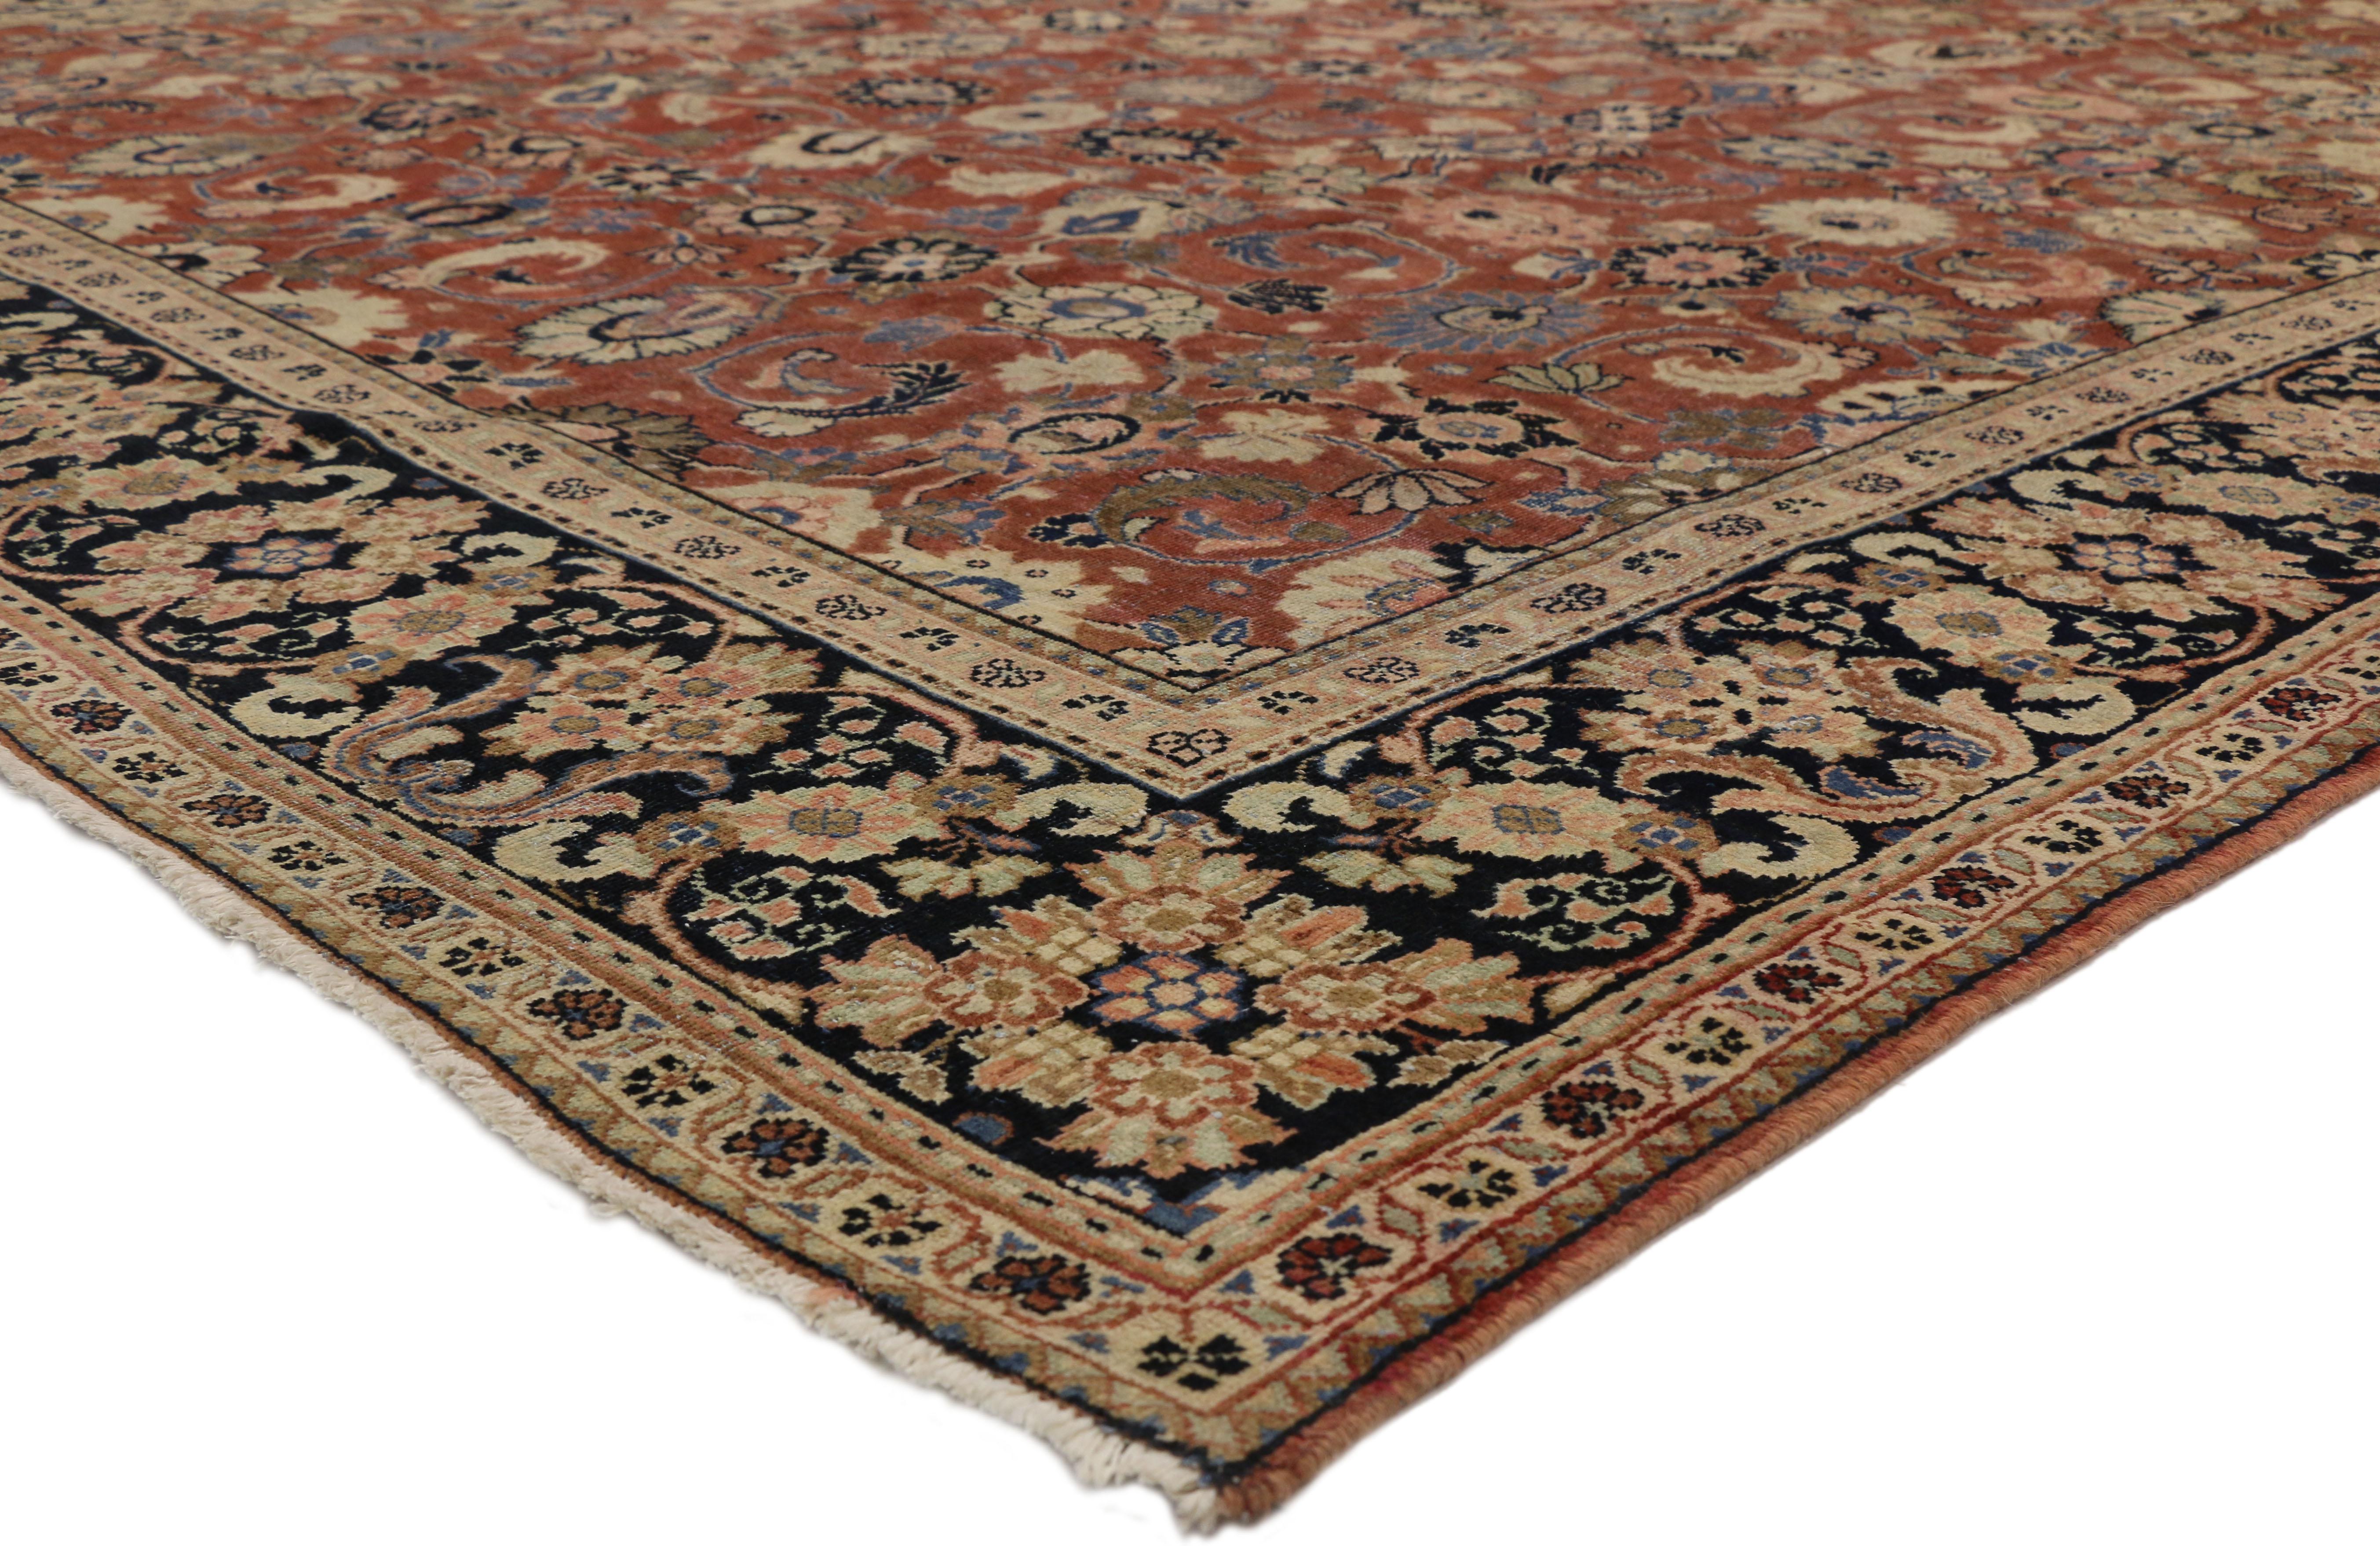 75702 Vintage Persian Mahal Area Rug with Traditional Colonial and Federal Style 10'04 X 13'03. This hand knotted wool vintage Persian Mahal rug with traditional style features an allover pattern of intricate herati florals, swirling vines with